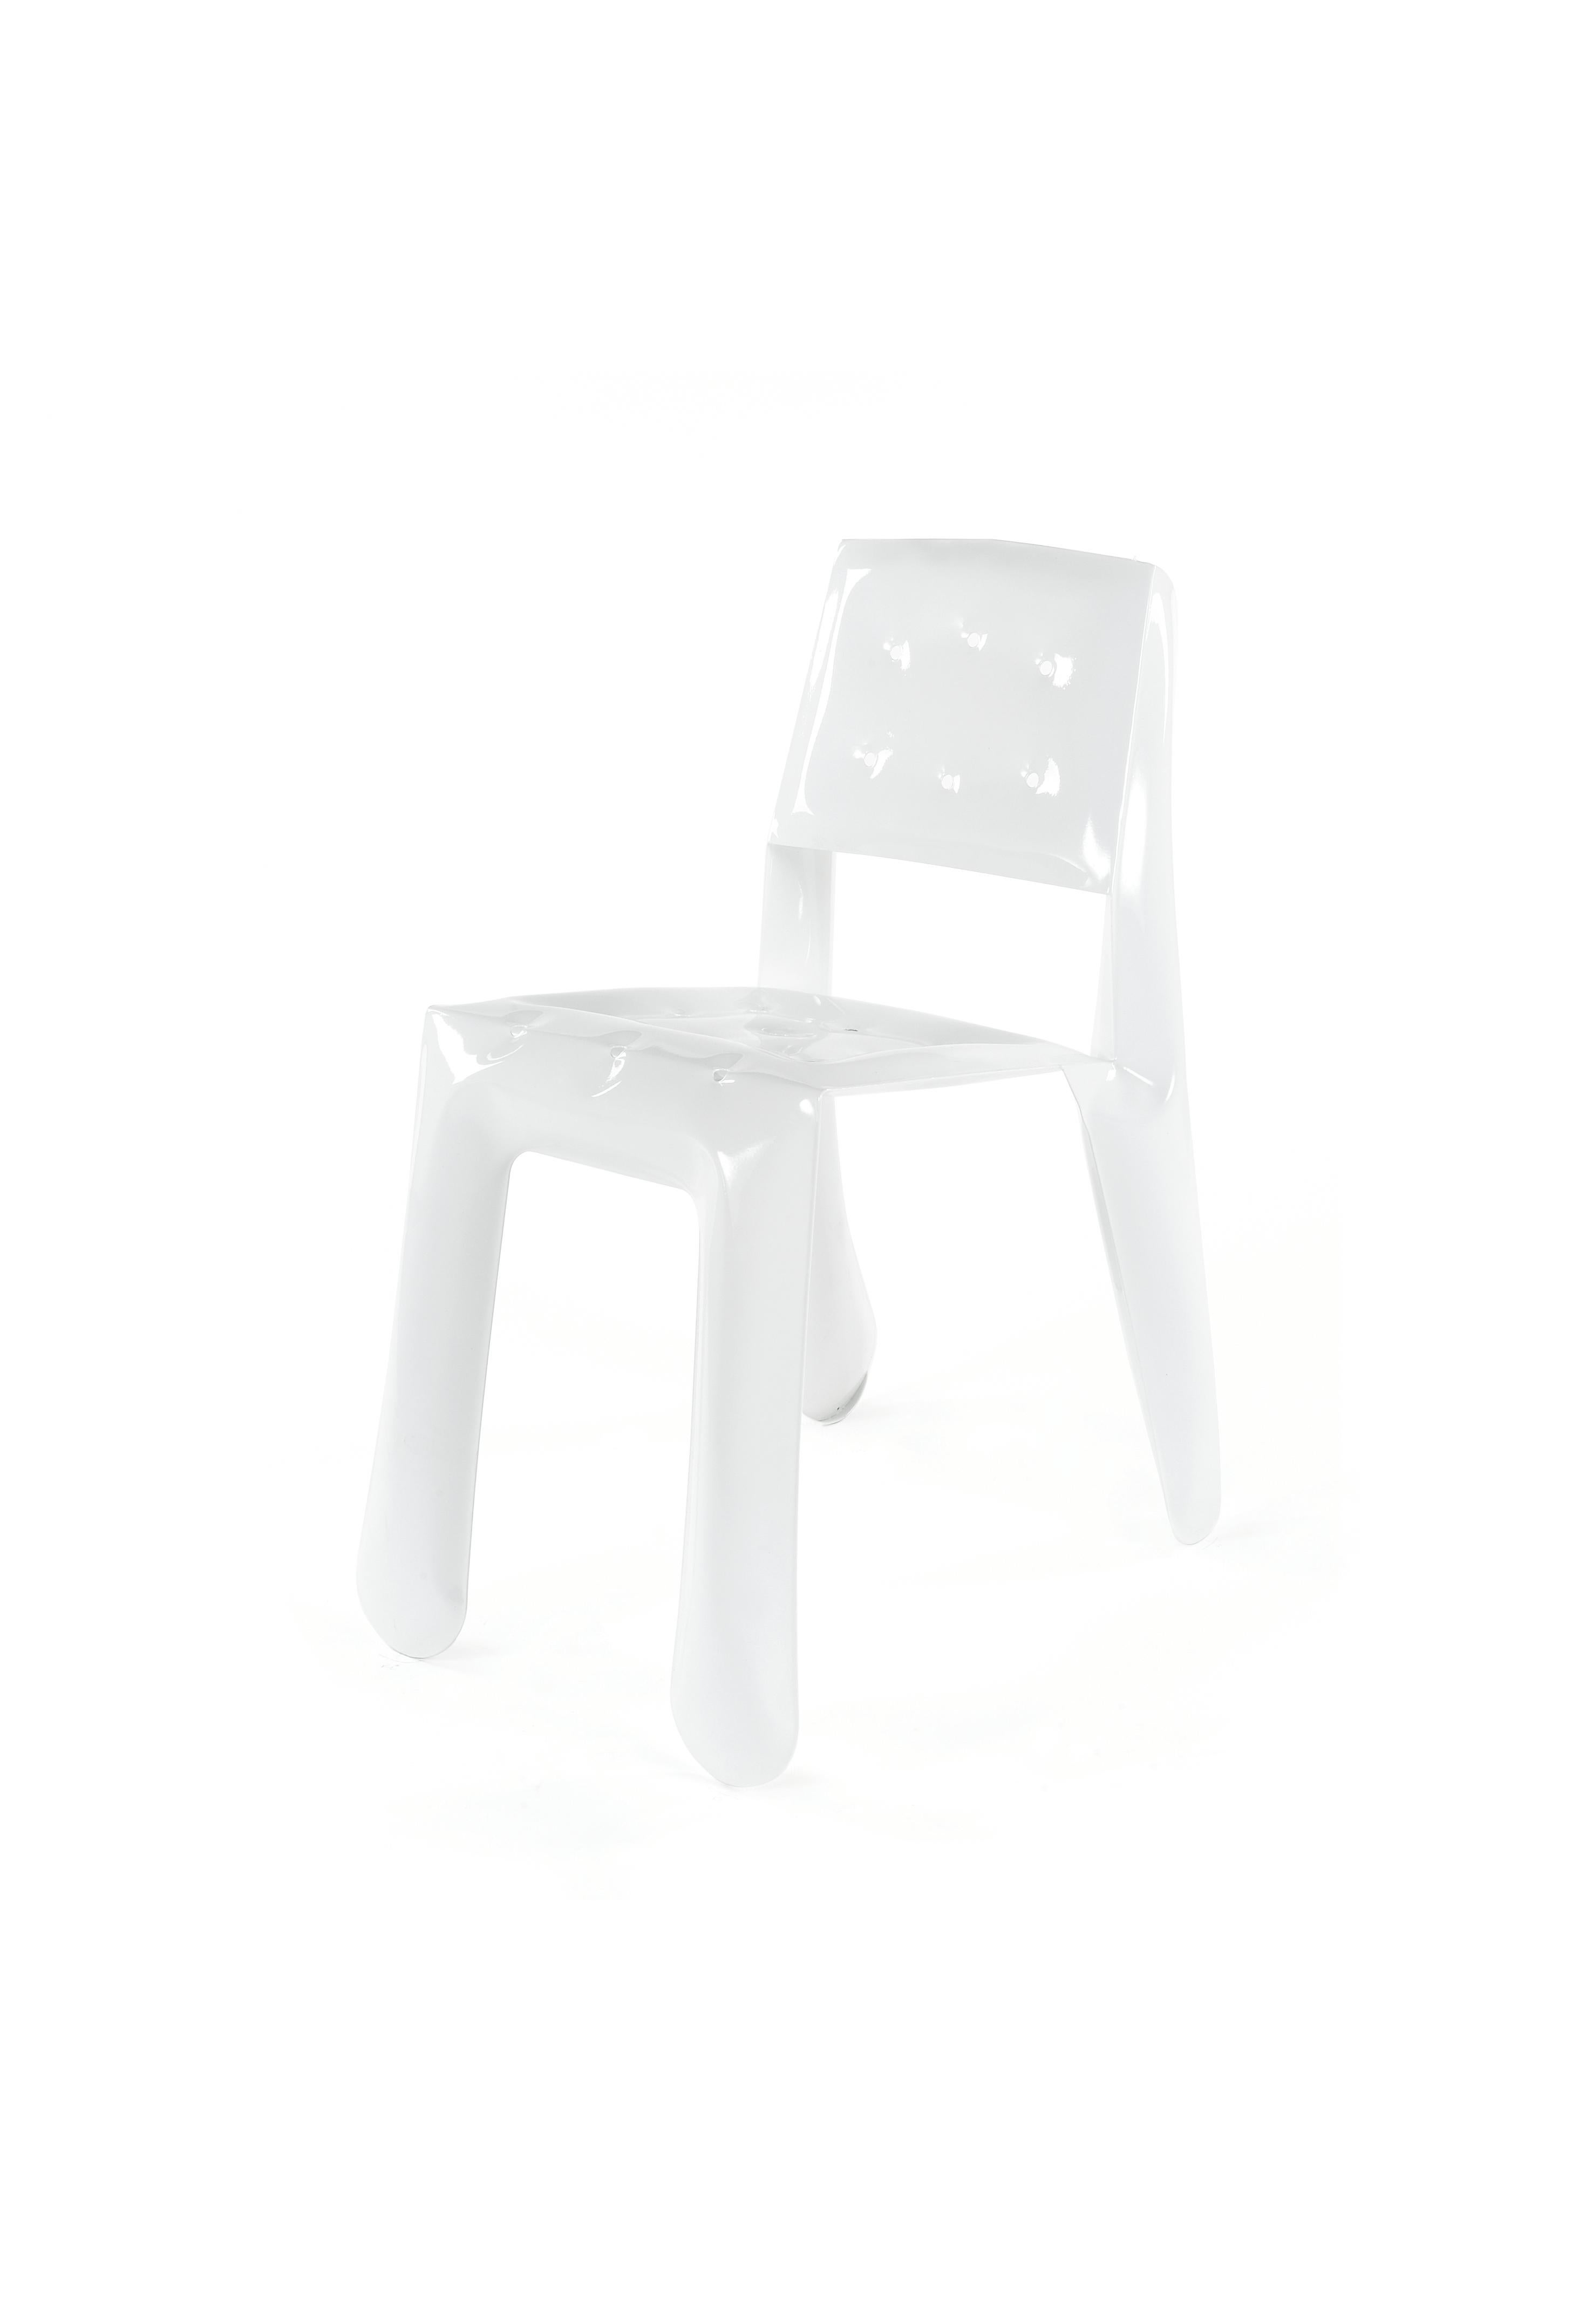 White Carbon Steel Chippensteel 0.5 Sculptural Chair by Zieta
Dimensions: D 58 x W 46 x H 80 cm 
Material: Carbon Steel. 
Finish: Powder-Coated. Glossy finish. 
Also available in colors: White Matt, Beige, Black, Blue-Gray, Graphite, Moss-Gray, and,